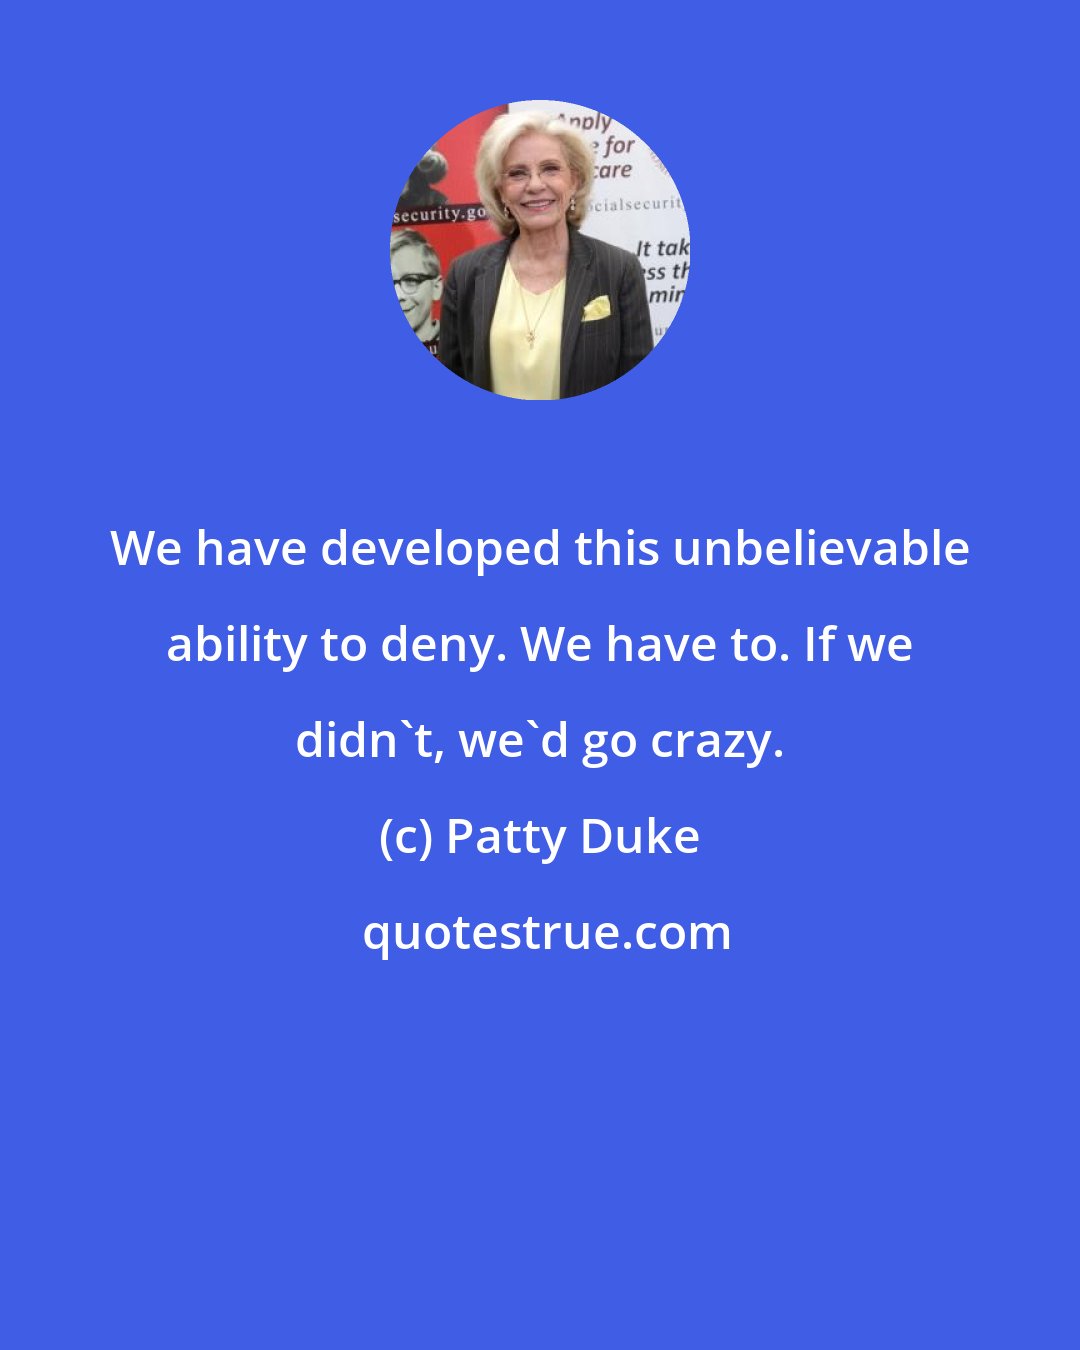 Patty Duke: We have developed this unbelievable ability to deny. We have to. If we didn't, we'd go crazy.